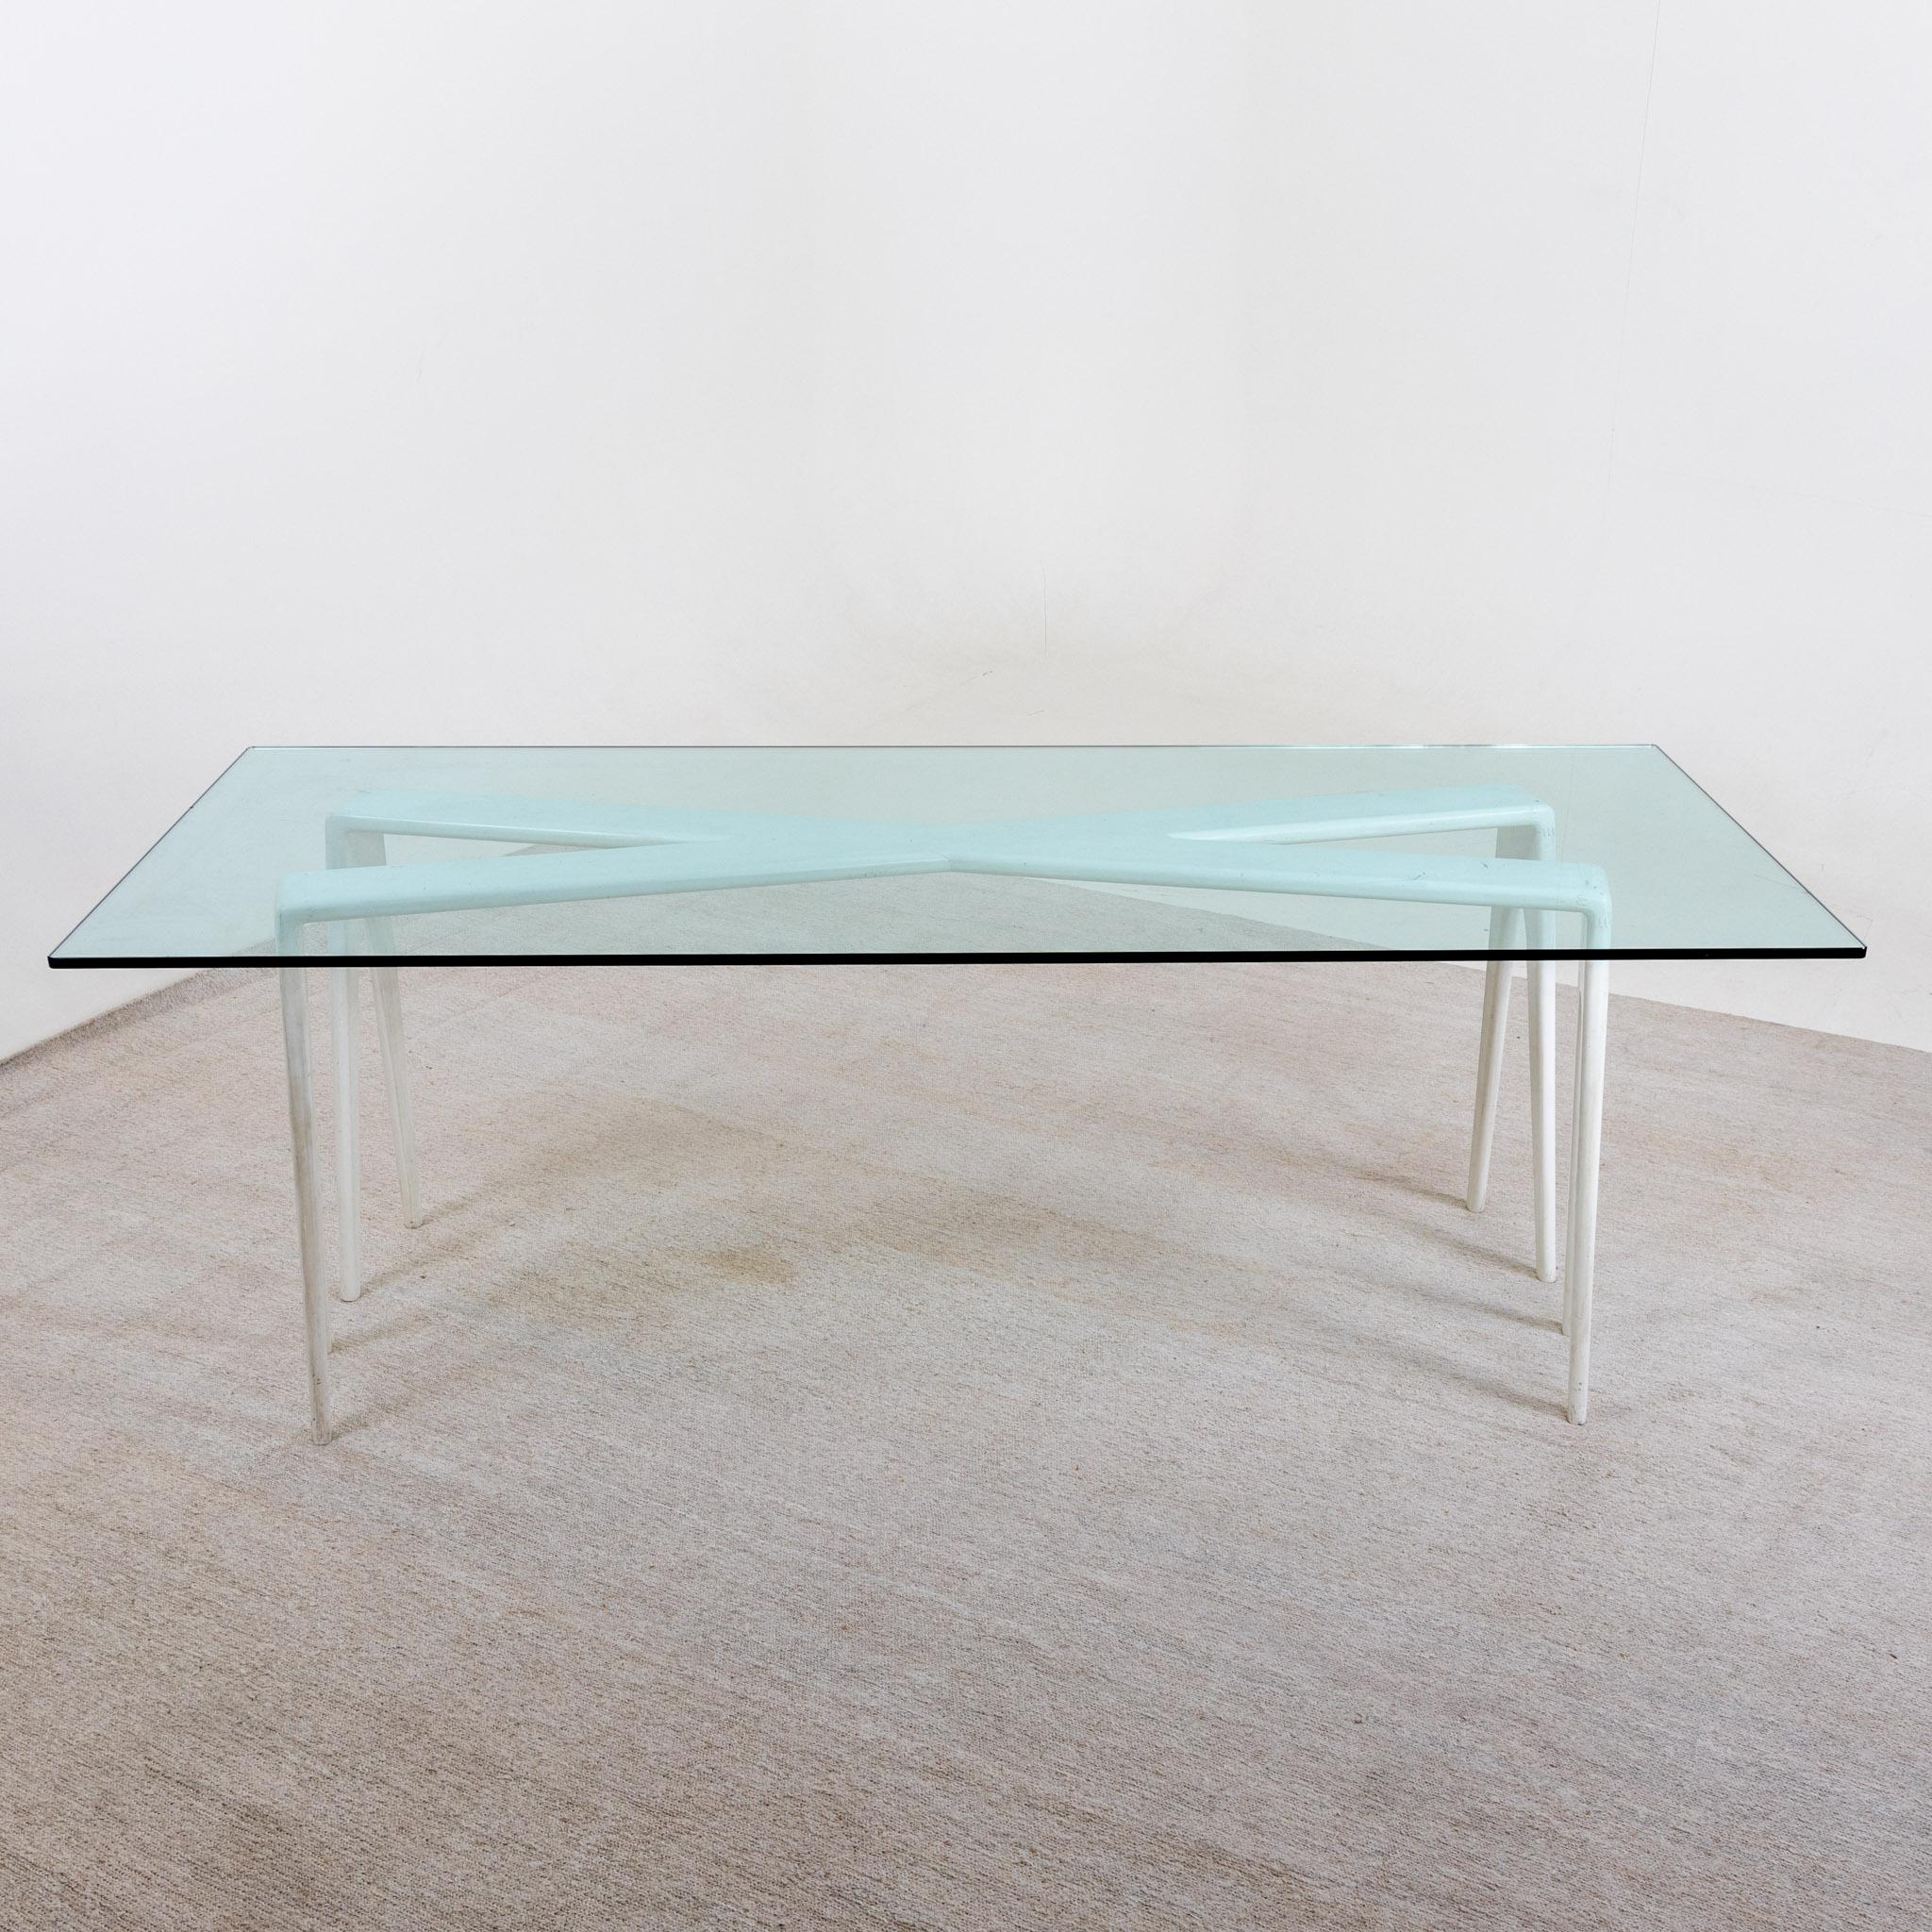 Large dining table with rectangular glass top on x-shaped white lacquered wooden frame. Slight signs of age and use.